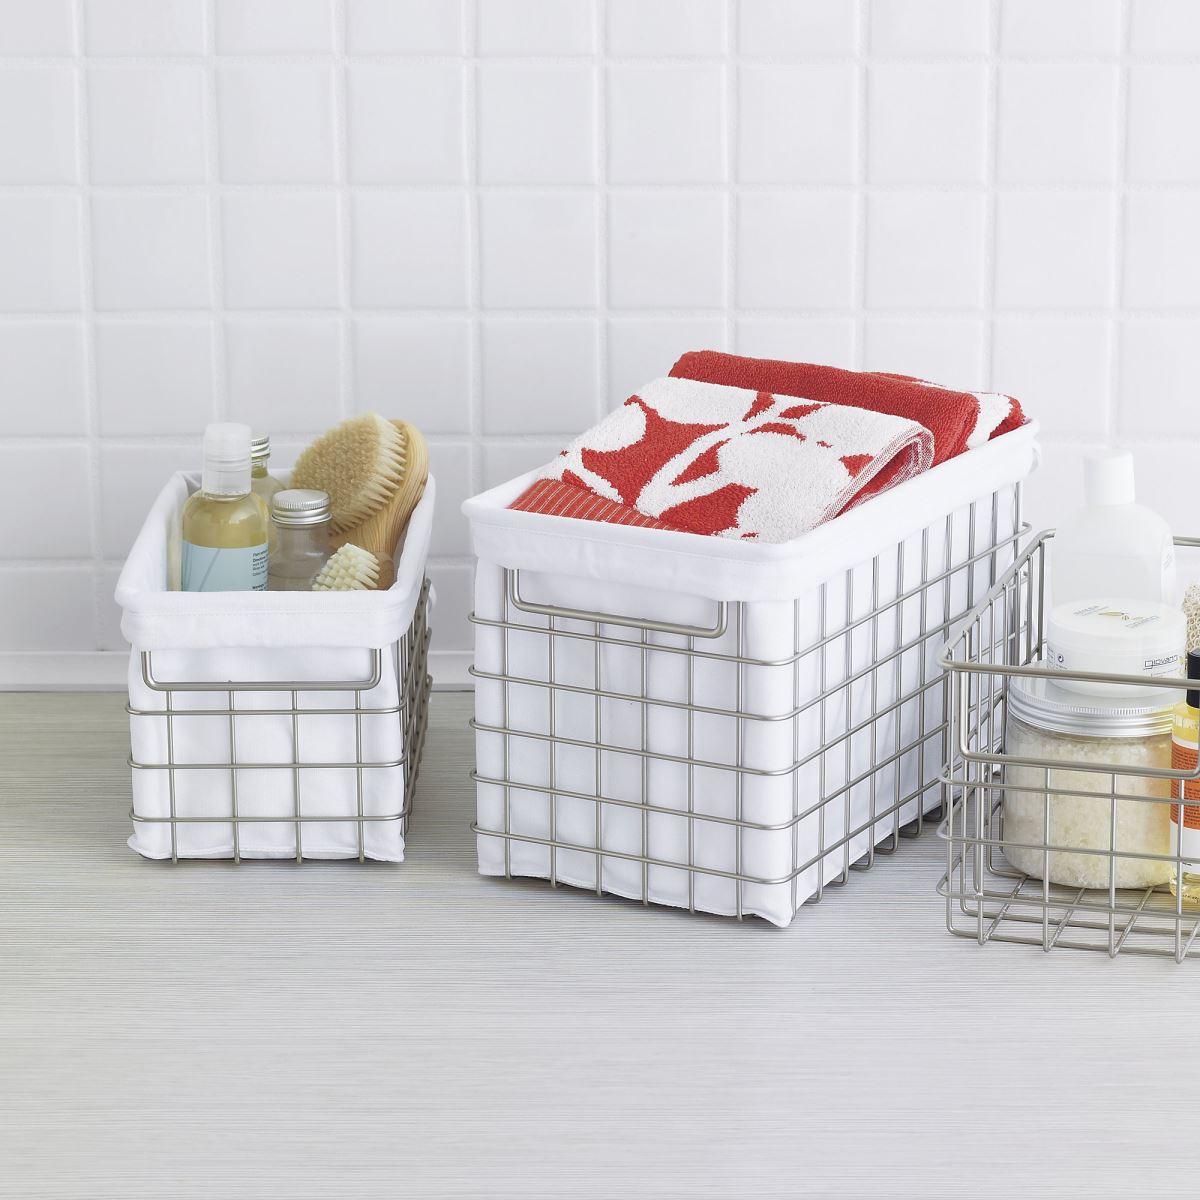 Storage baskets with liners